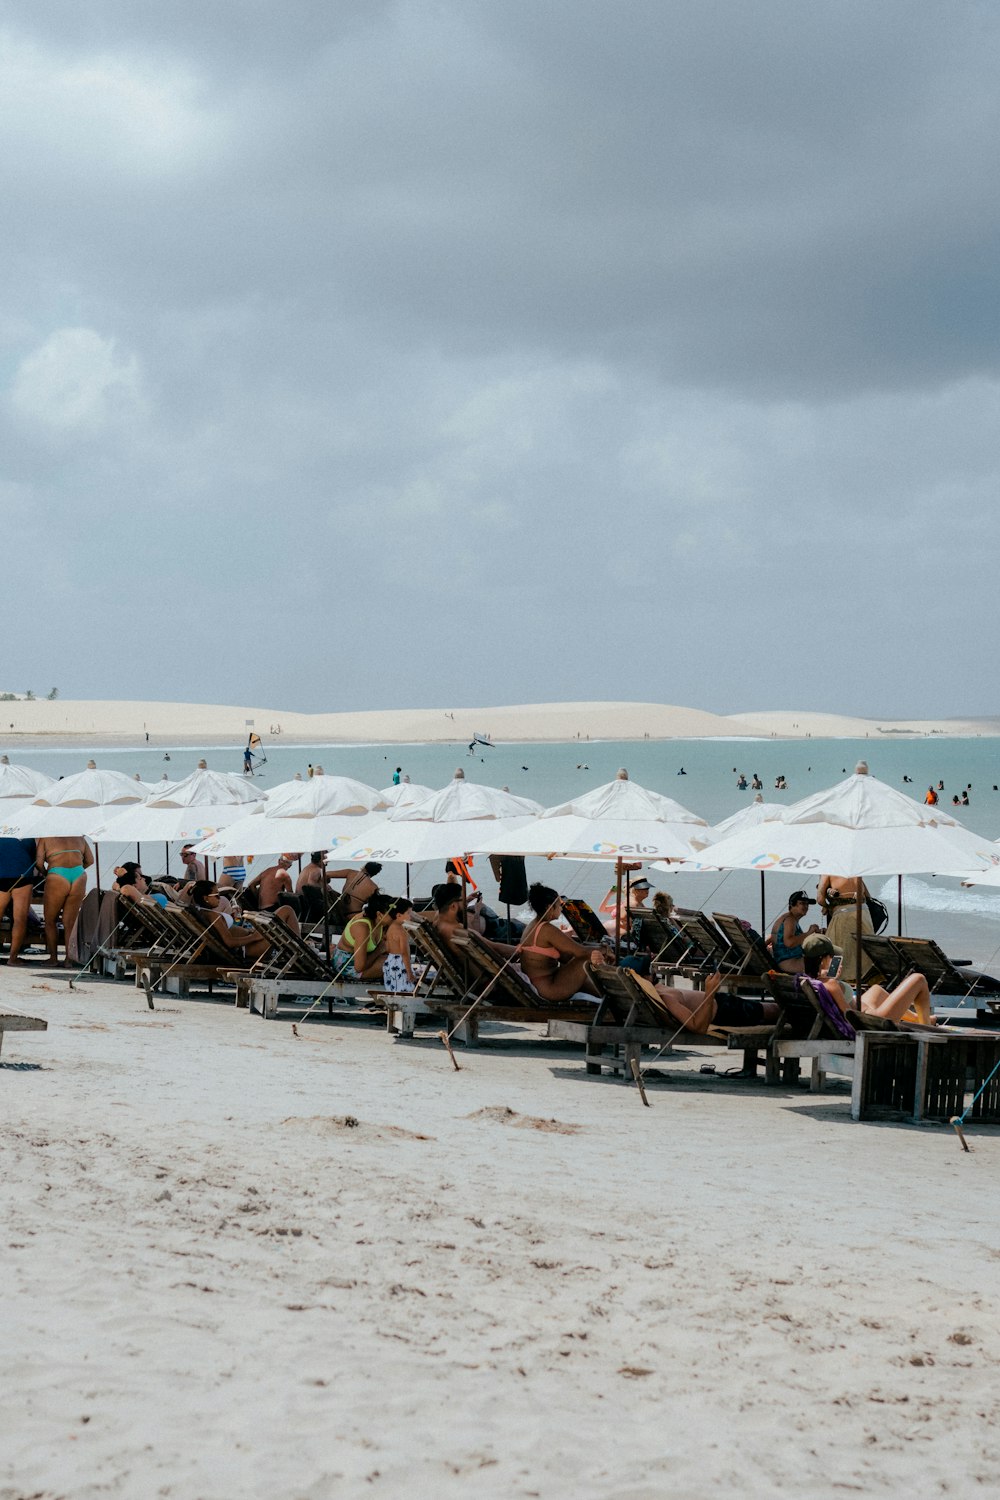 a group of people sitting under umbrellas on a beach